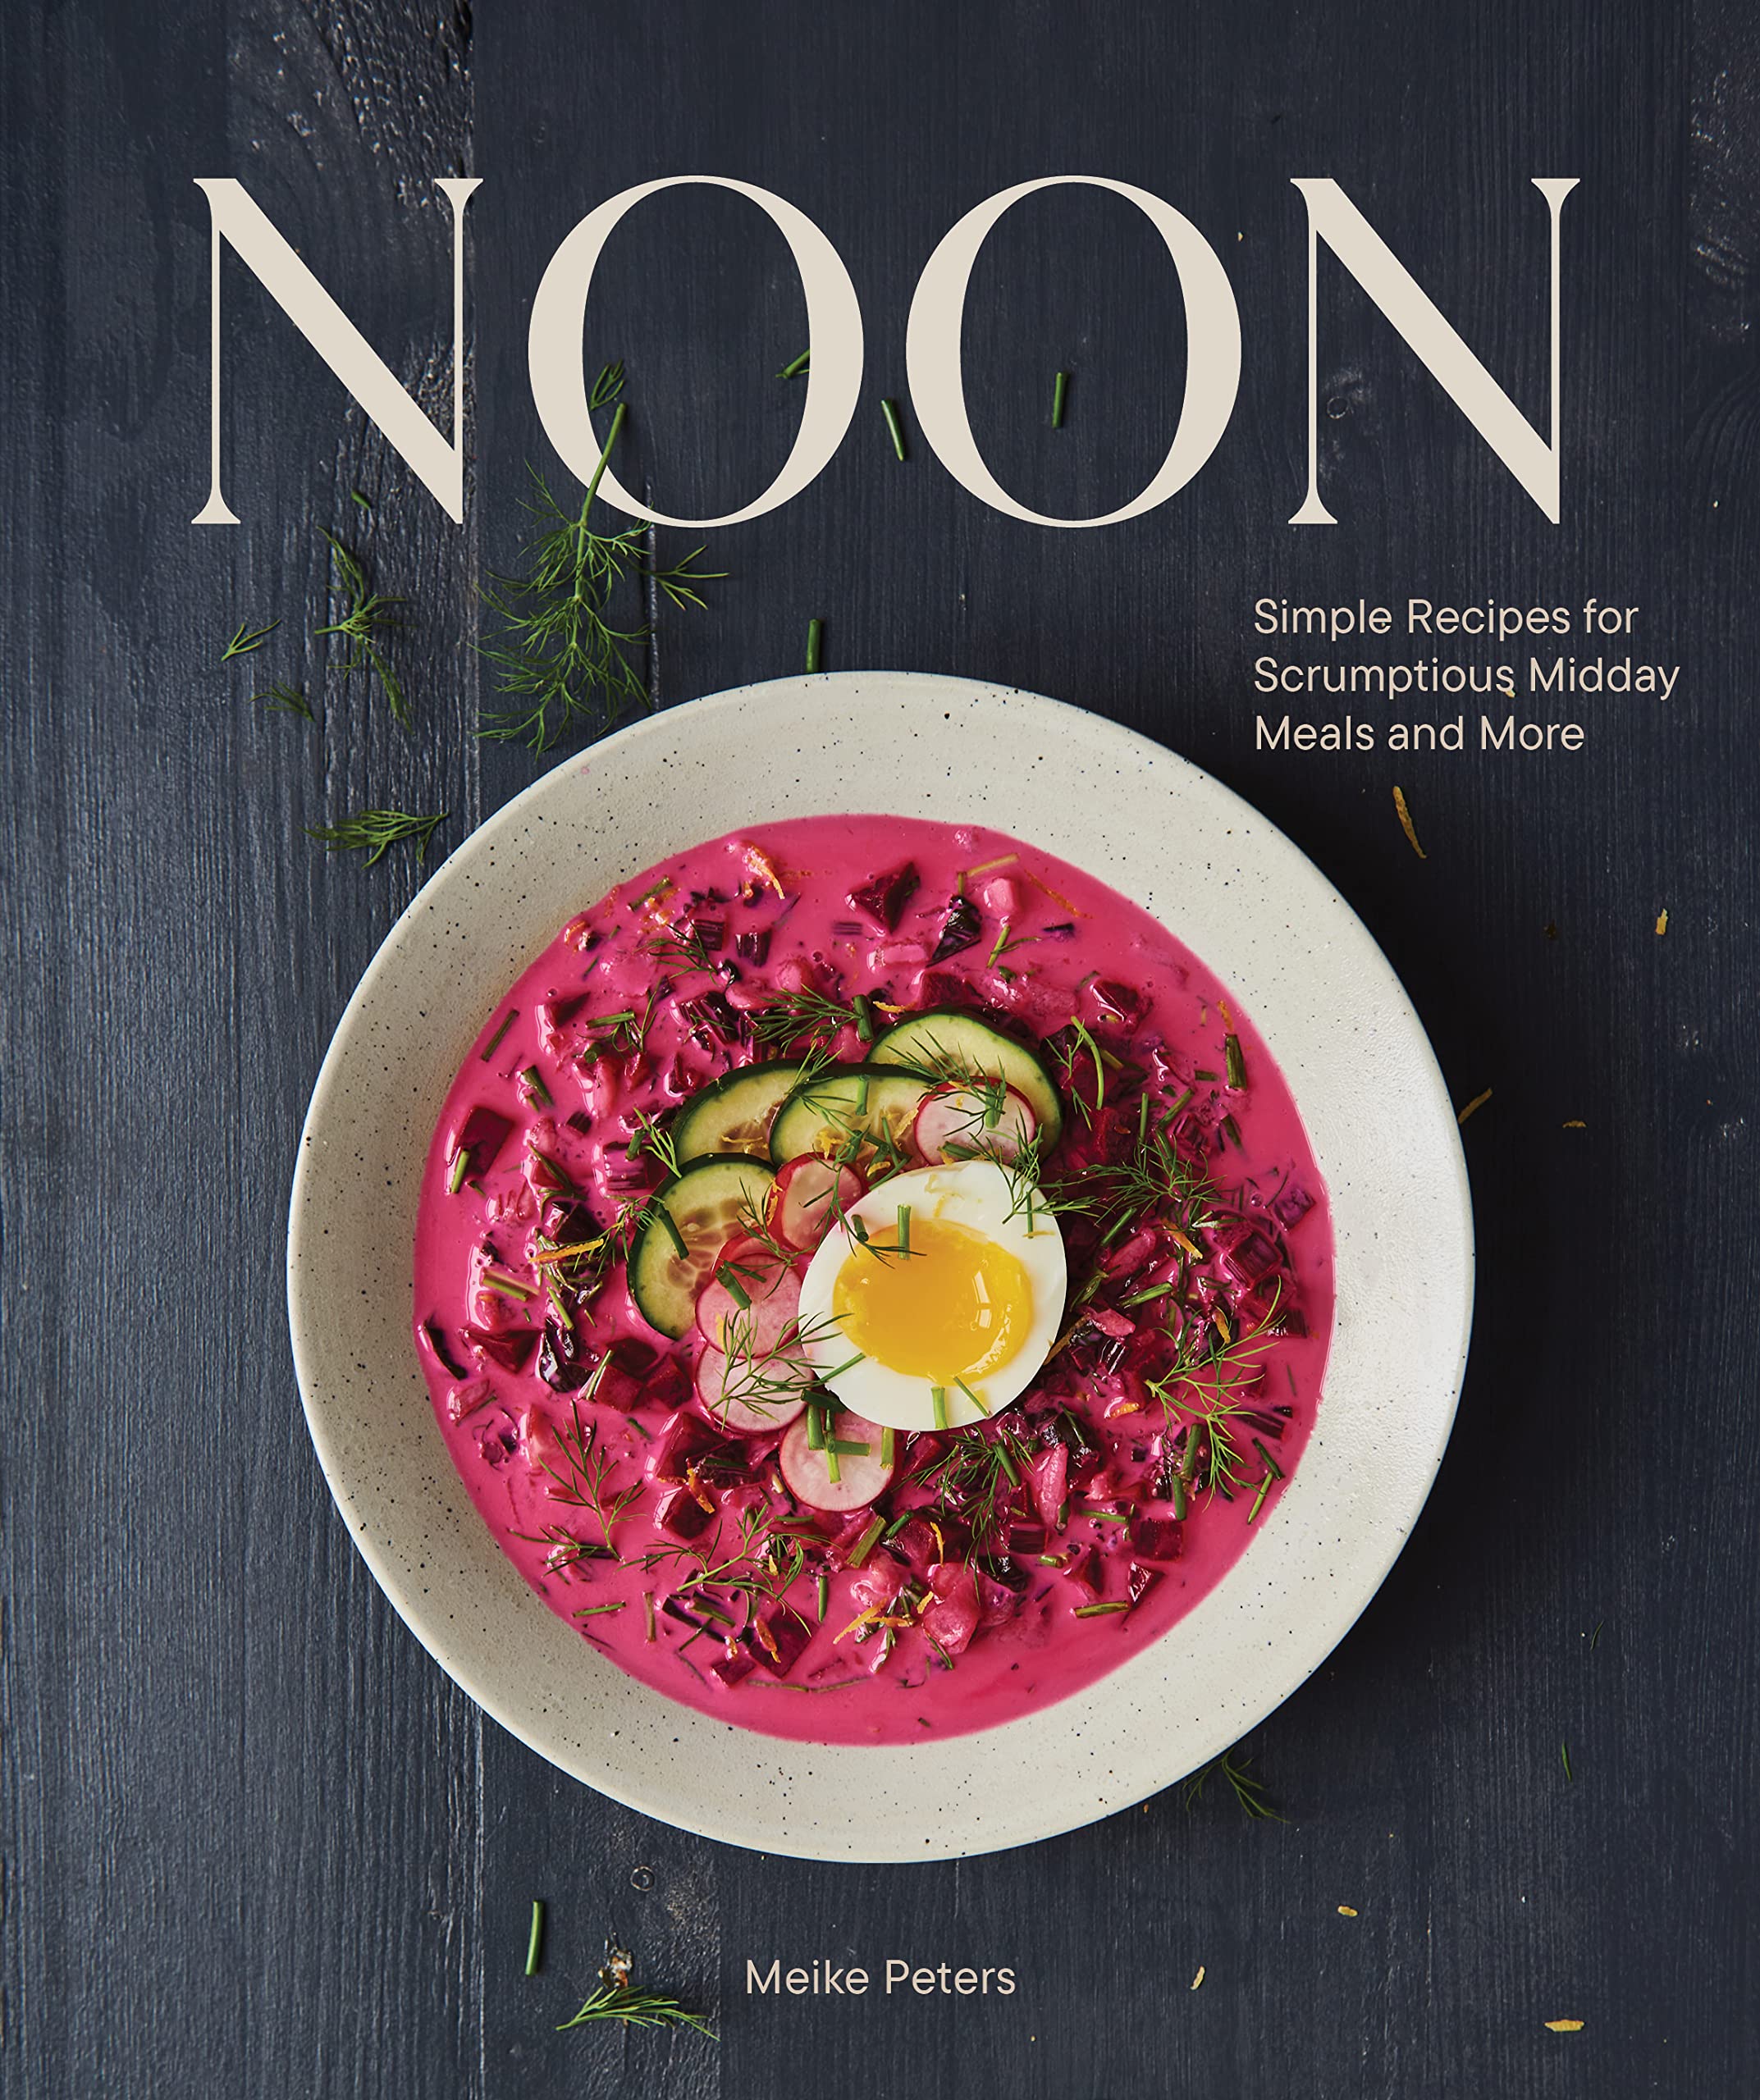 Noon: Simple Recipes for Scrumptious Midday Meals and More (Meike Peters) *Signed*